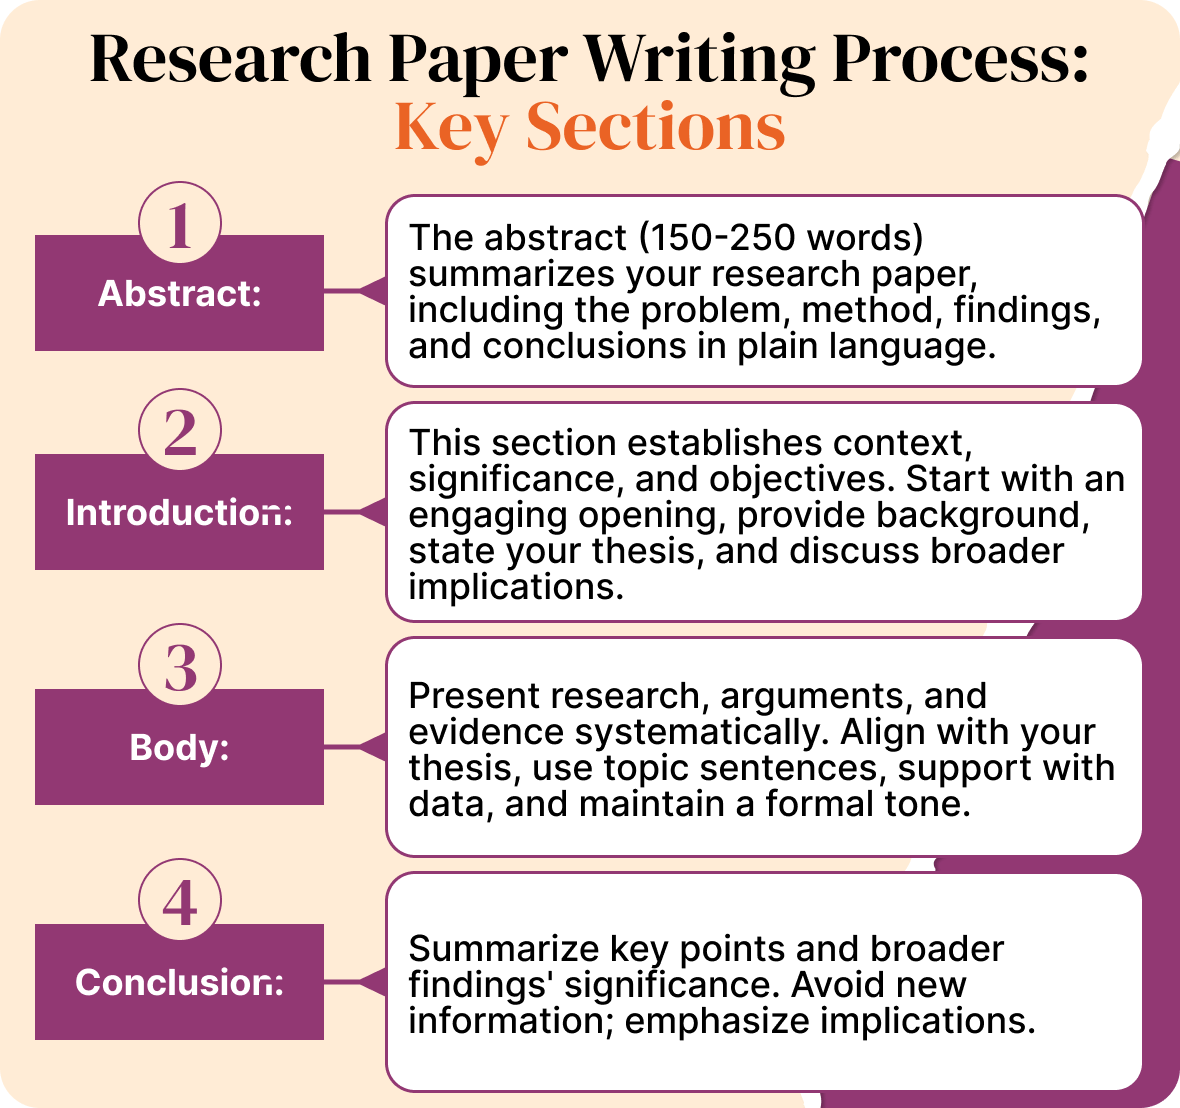 Unlock your academic potential with expert guidance for crafting top-notch research papers. Expert Academic Assignment Help provides proven tips to enhance your writing skills.

Email: expertassignment46@gmail.com#ResearchPaperTips #AcademicWriting #ScholarlyAdvice #Writing